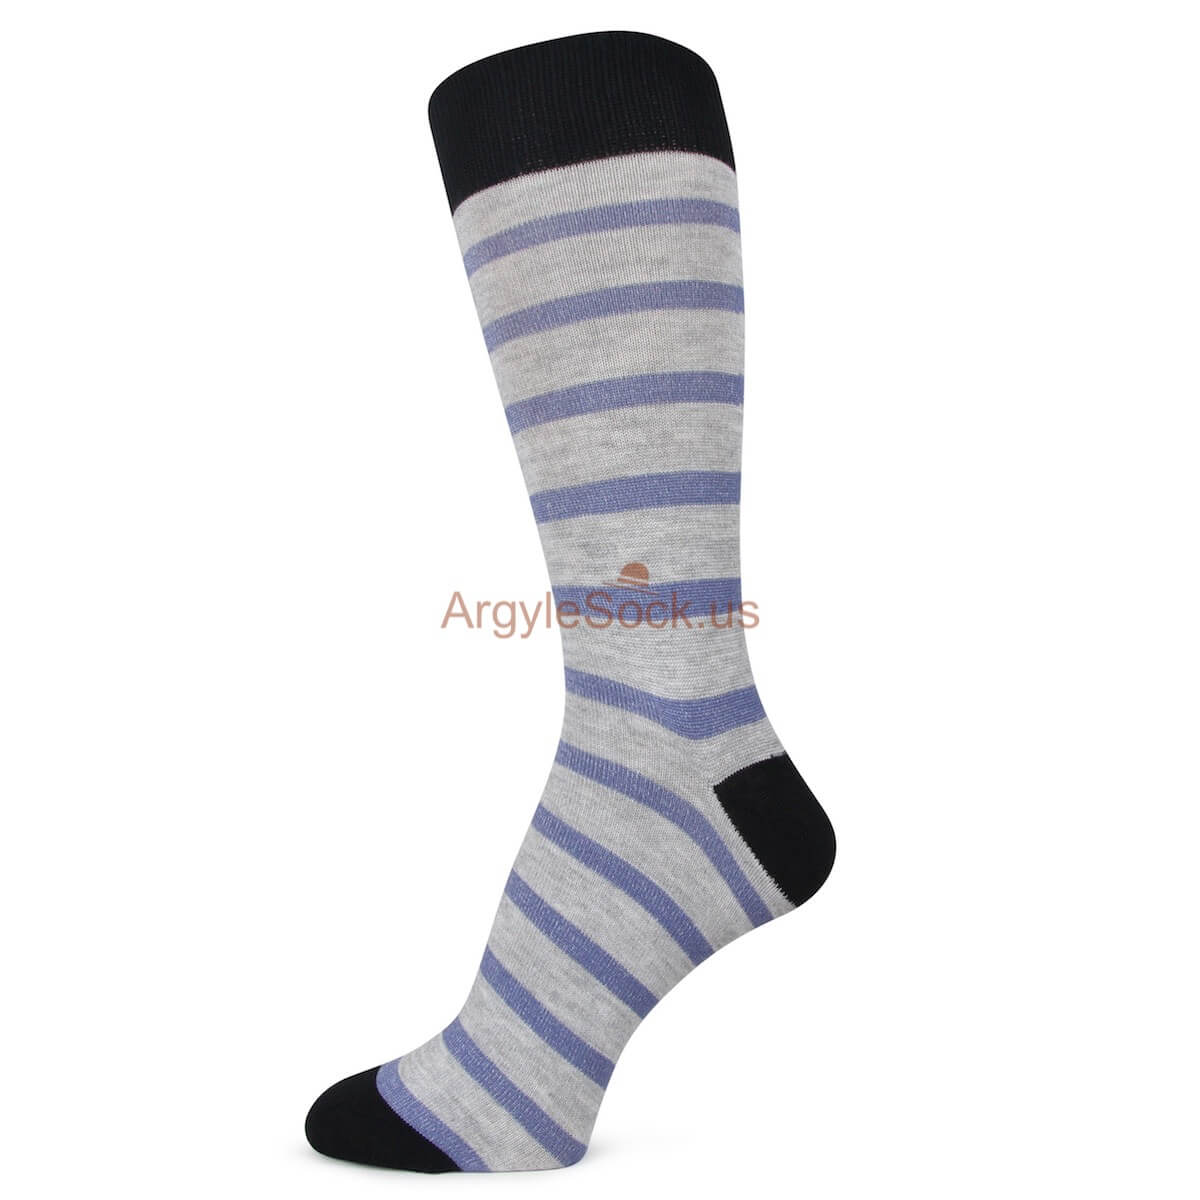 Black and Grey with Purple Stripes Mens Socks